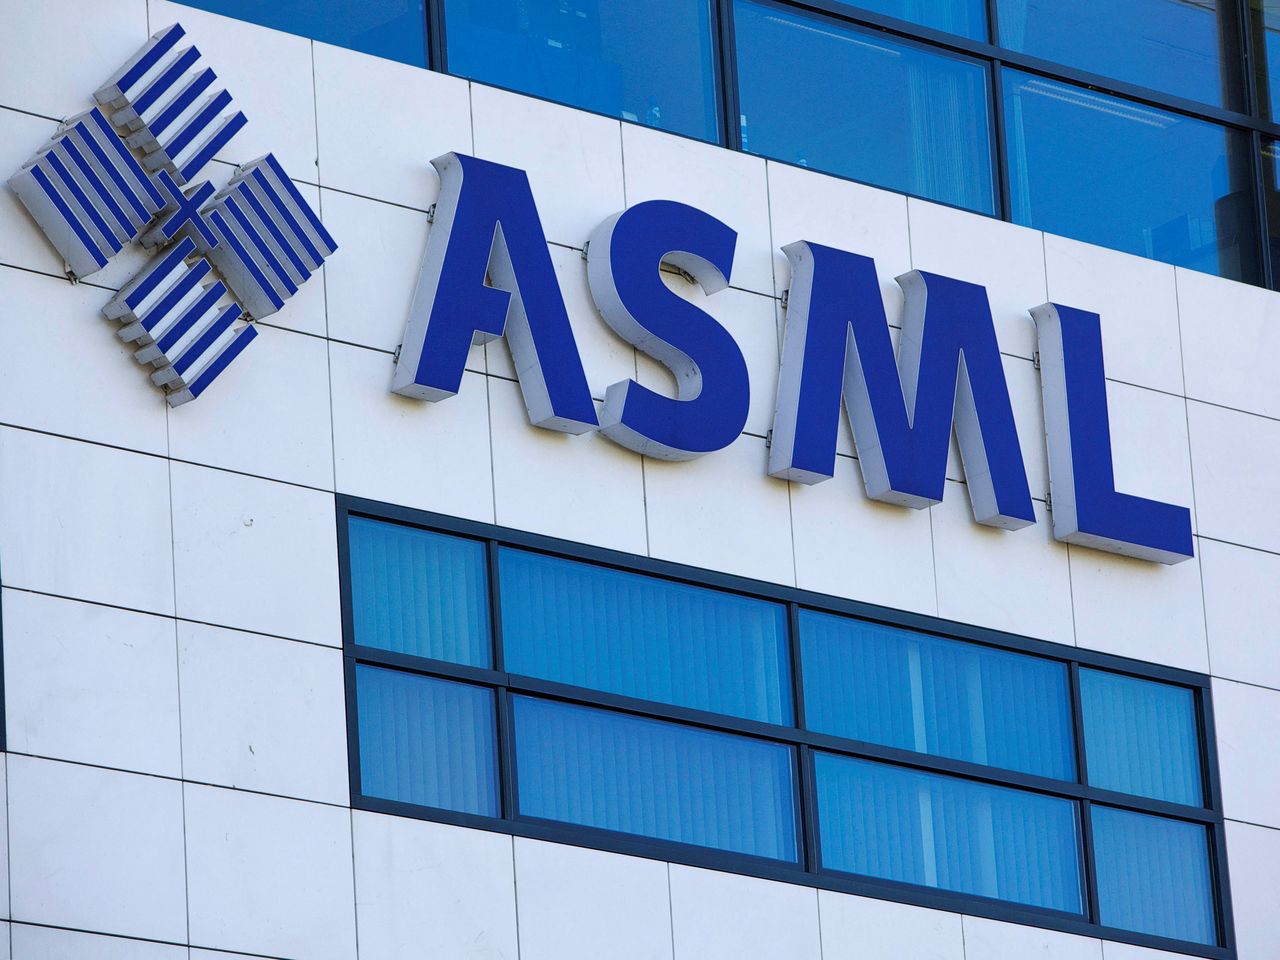 FILE PHOTO: The company logo of Dutch chipmakers ASML is seen on the headquarters in Veldhoven, October 14, 2009. REUTERS/Michael Kooren